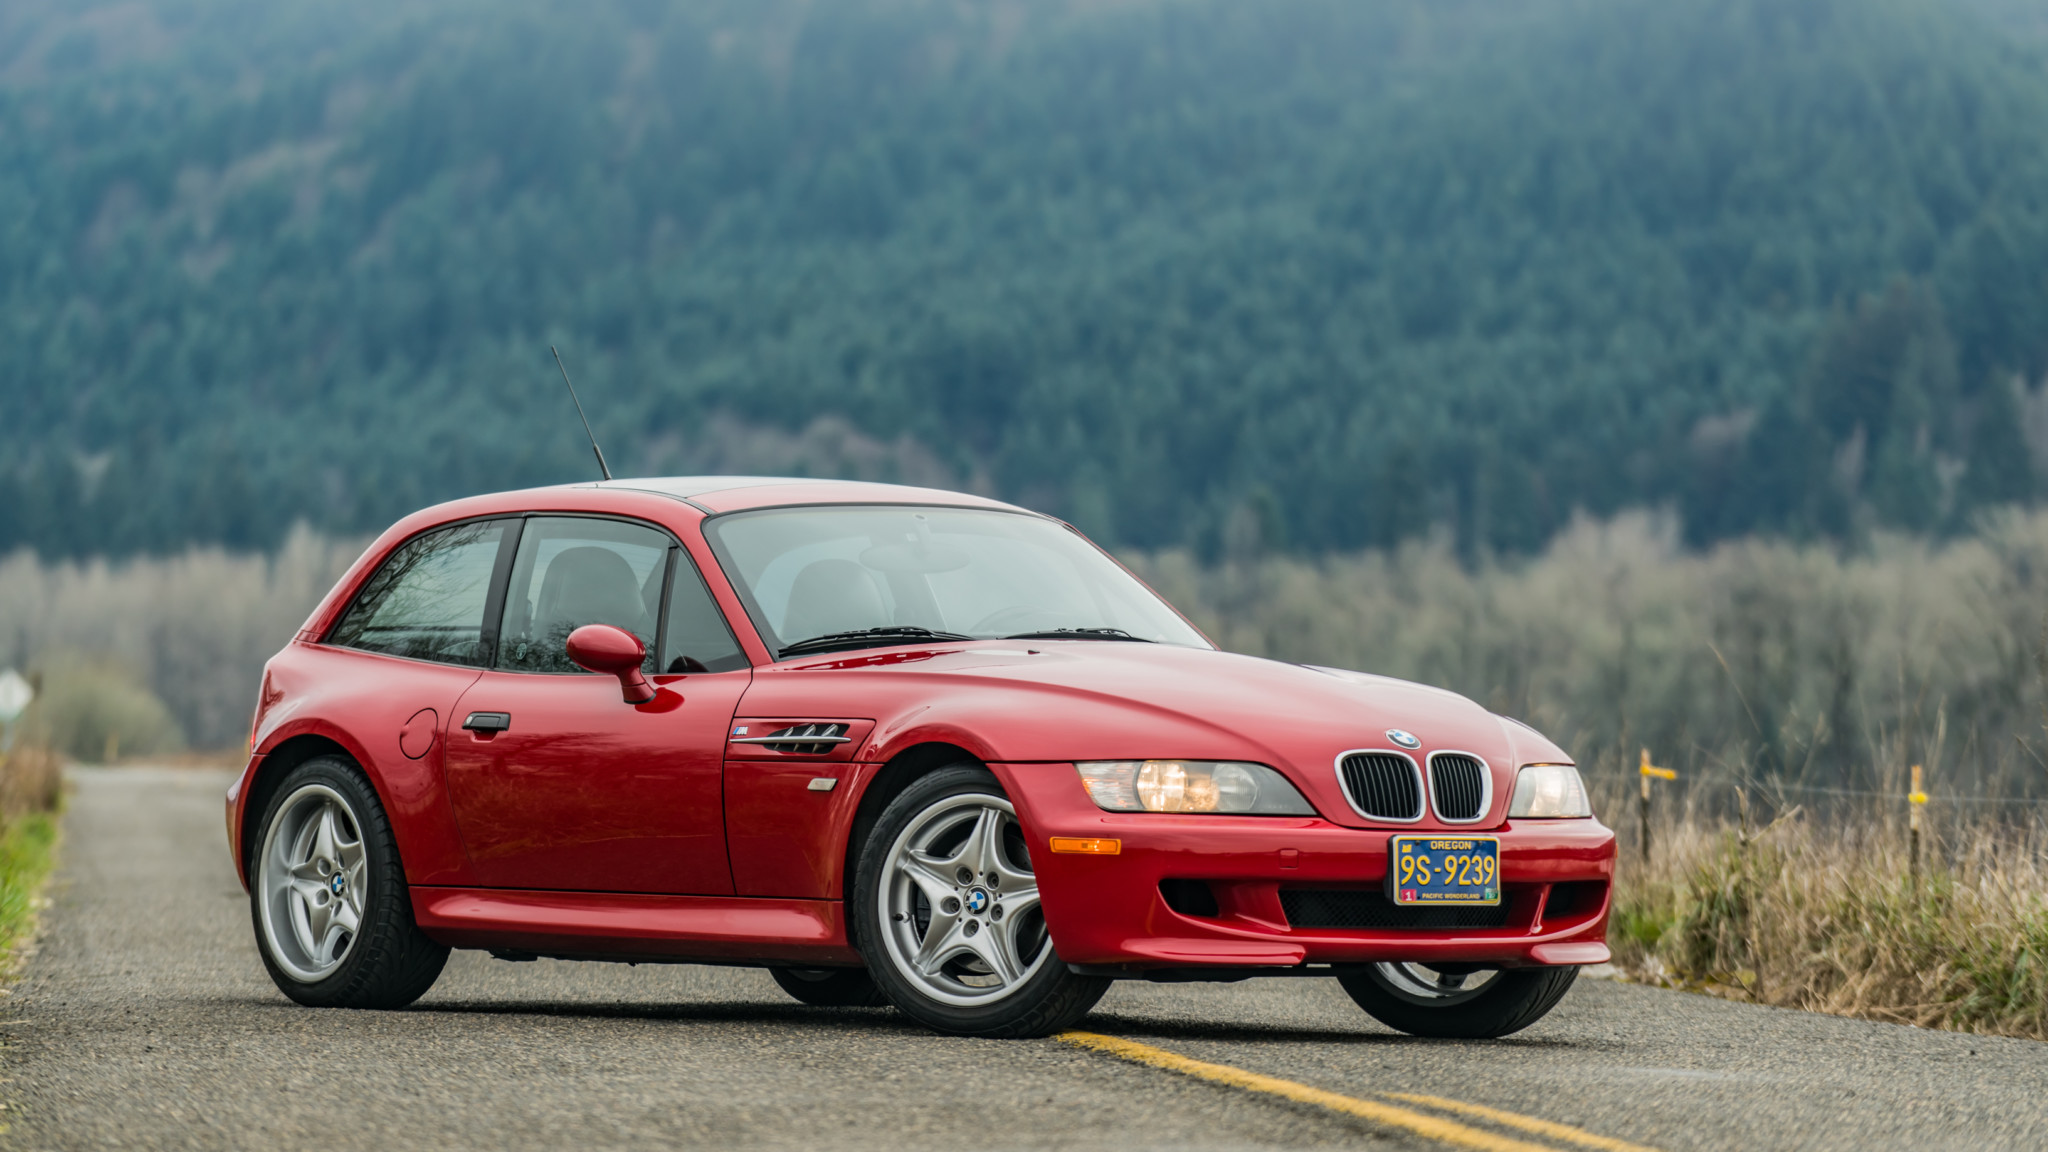 Bmw M Coupe Wallpapers